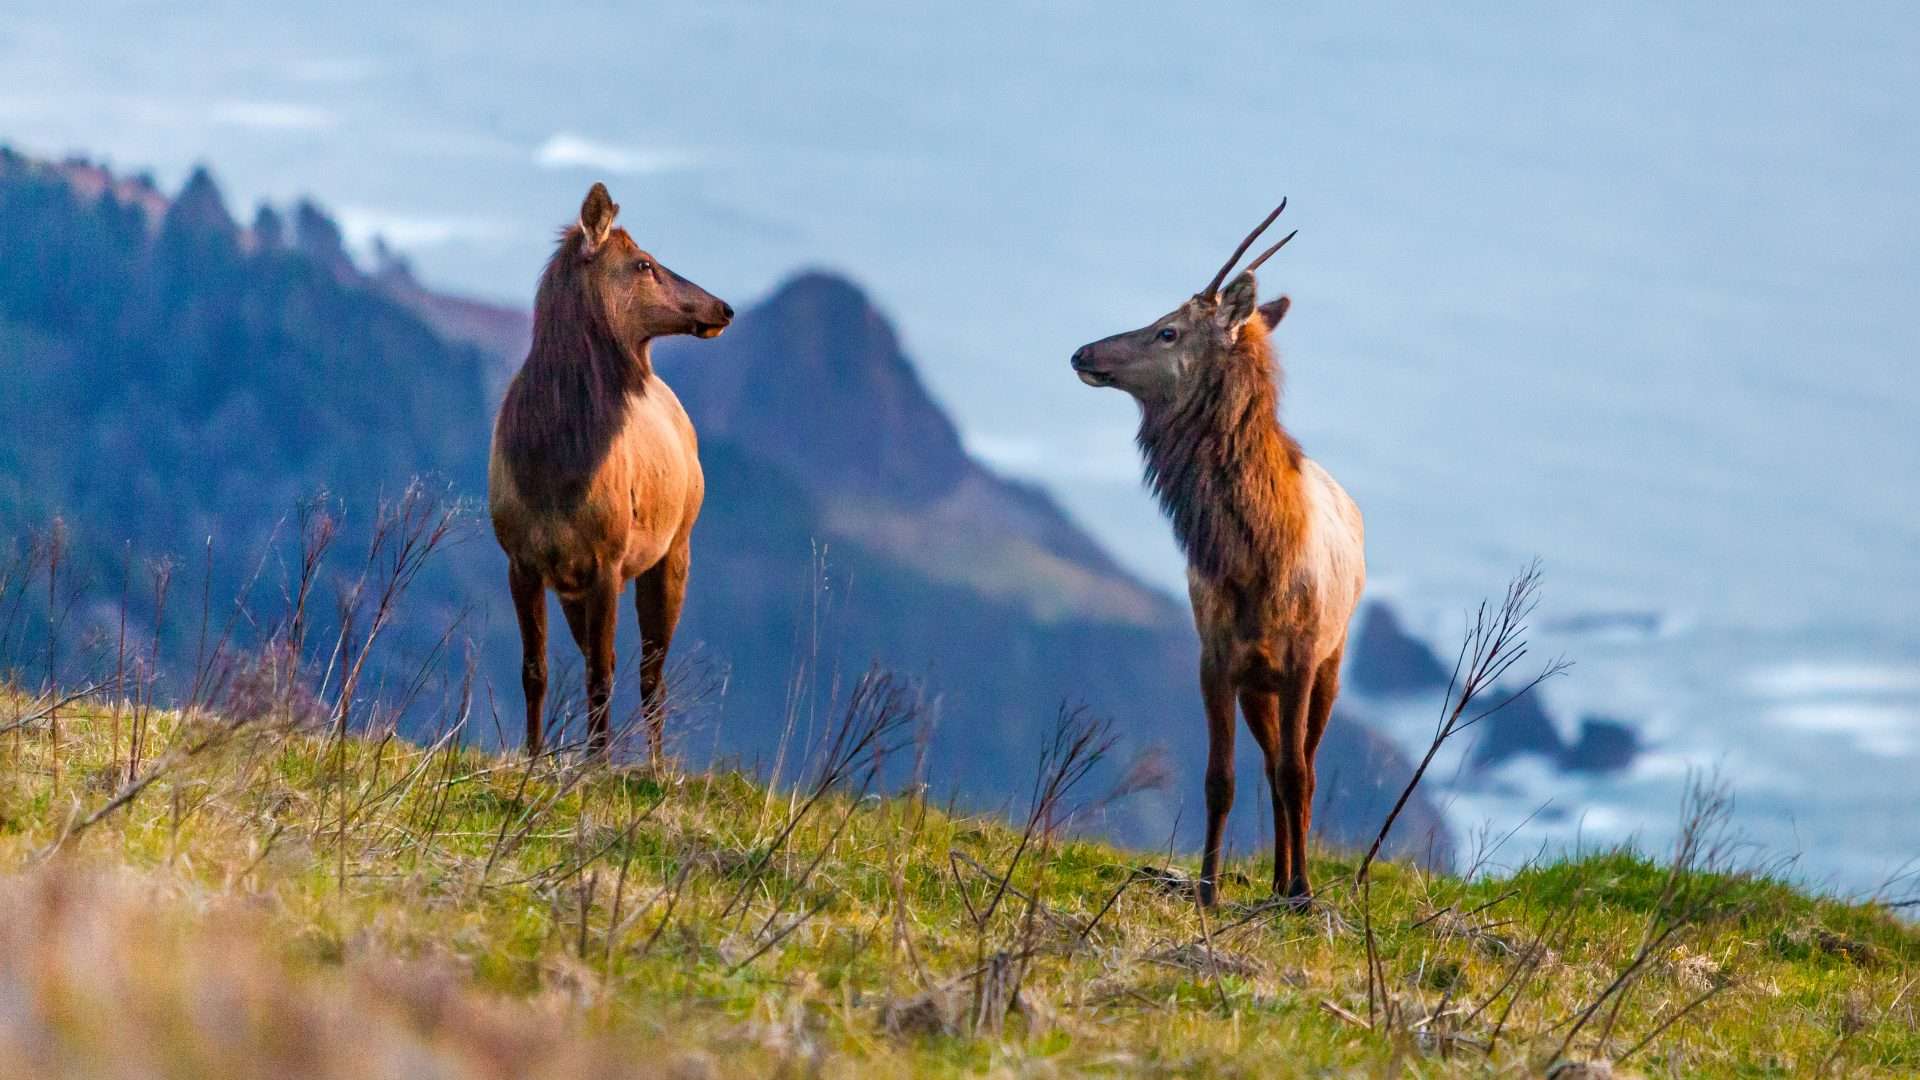 Two elk stand on a high promontory with lower headlands and a blue ocean in the background.